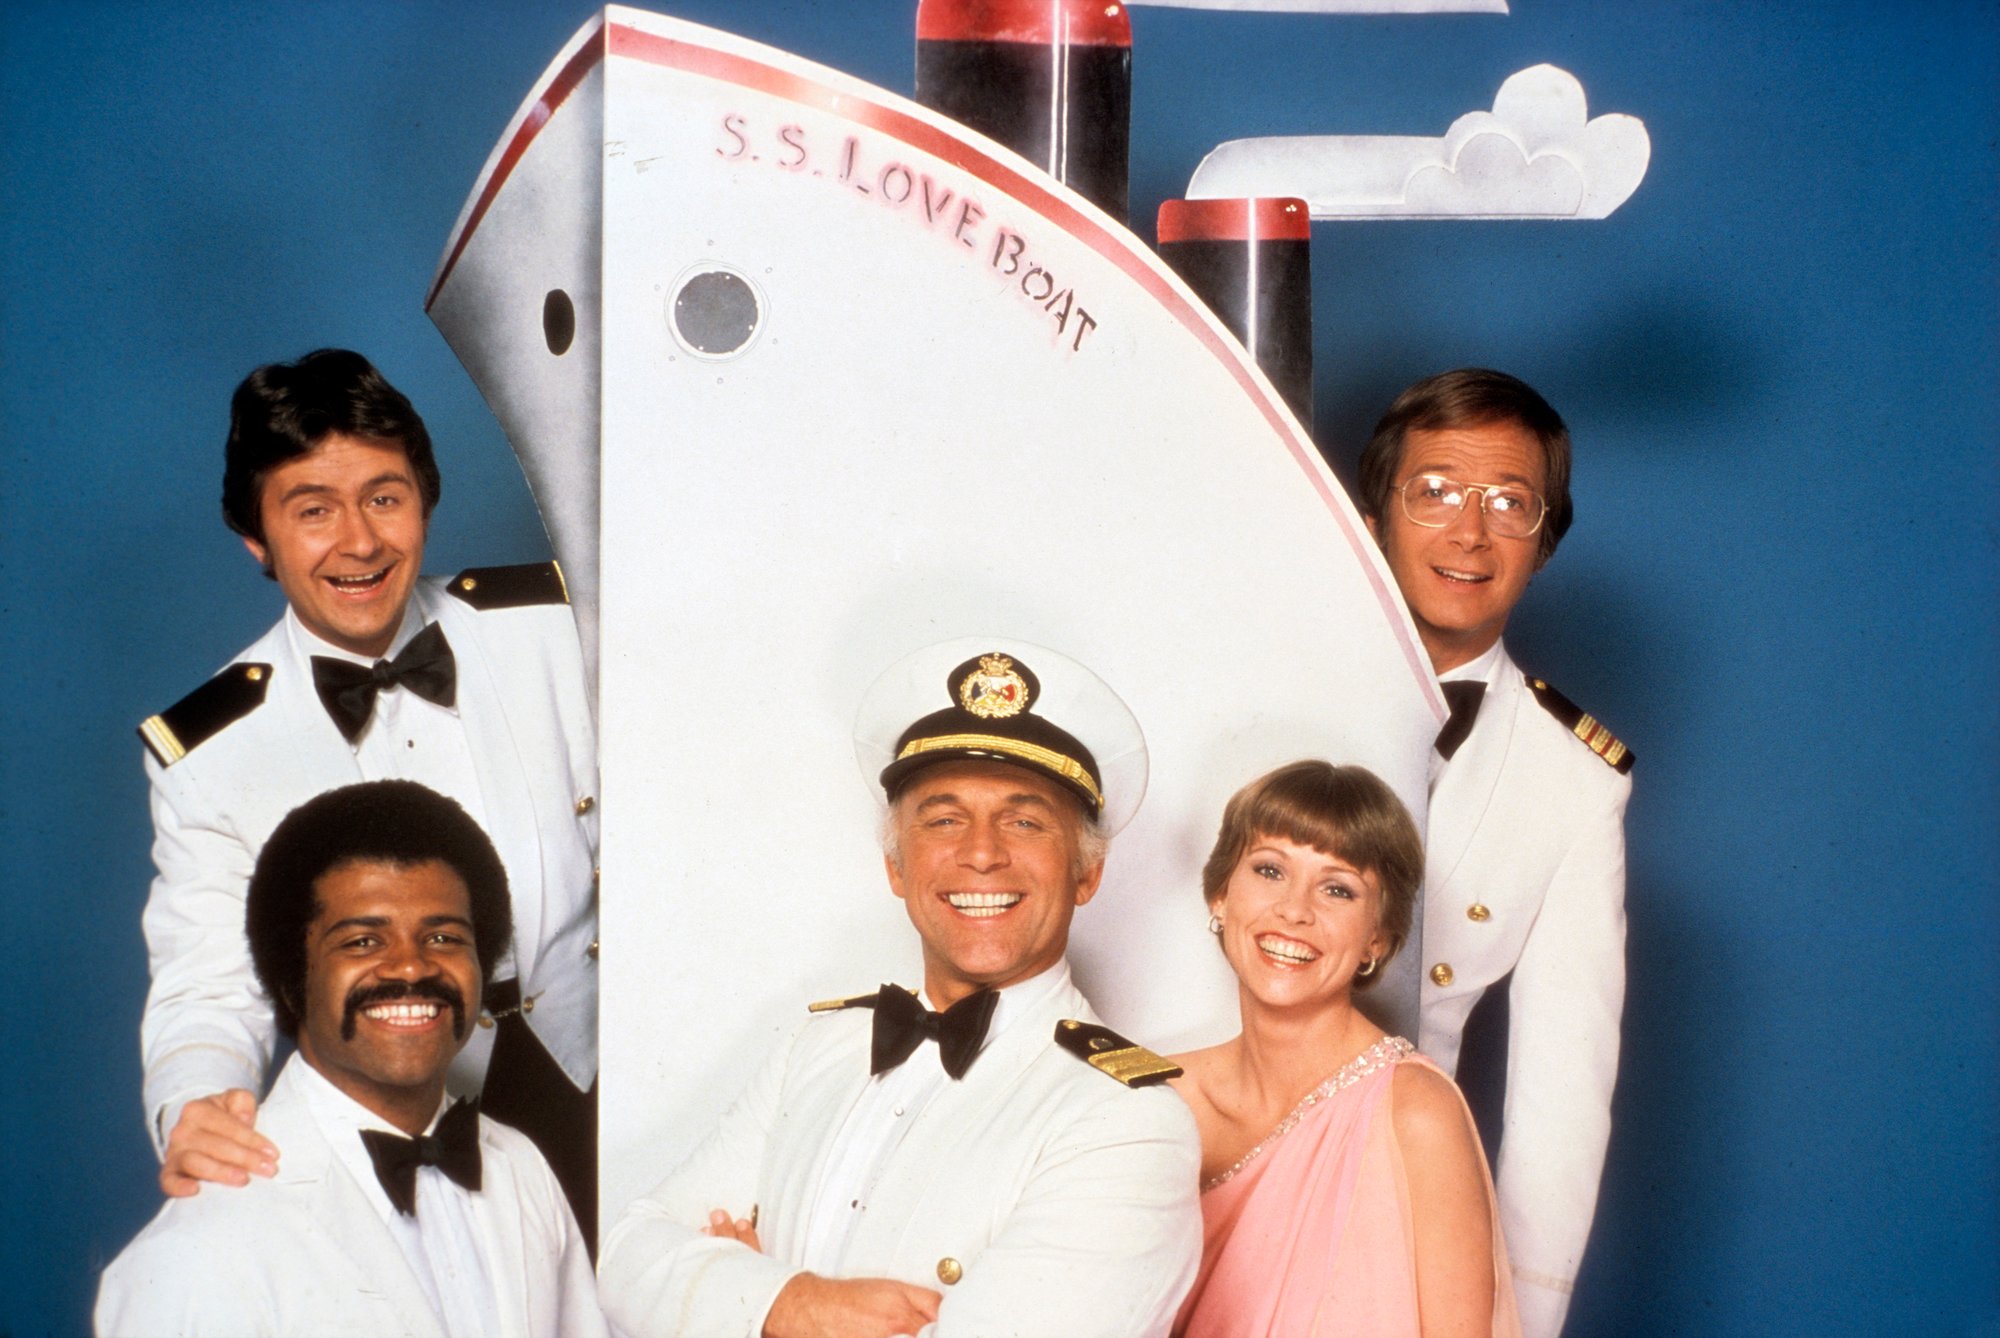 Was ‘The Love Boat’ Filmed on a Real Ship?